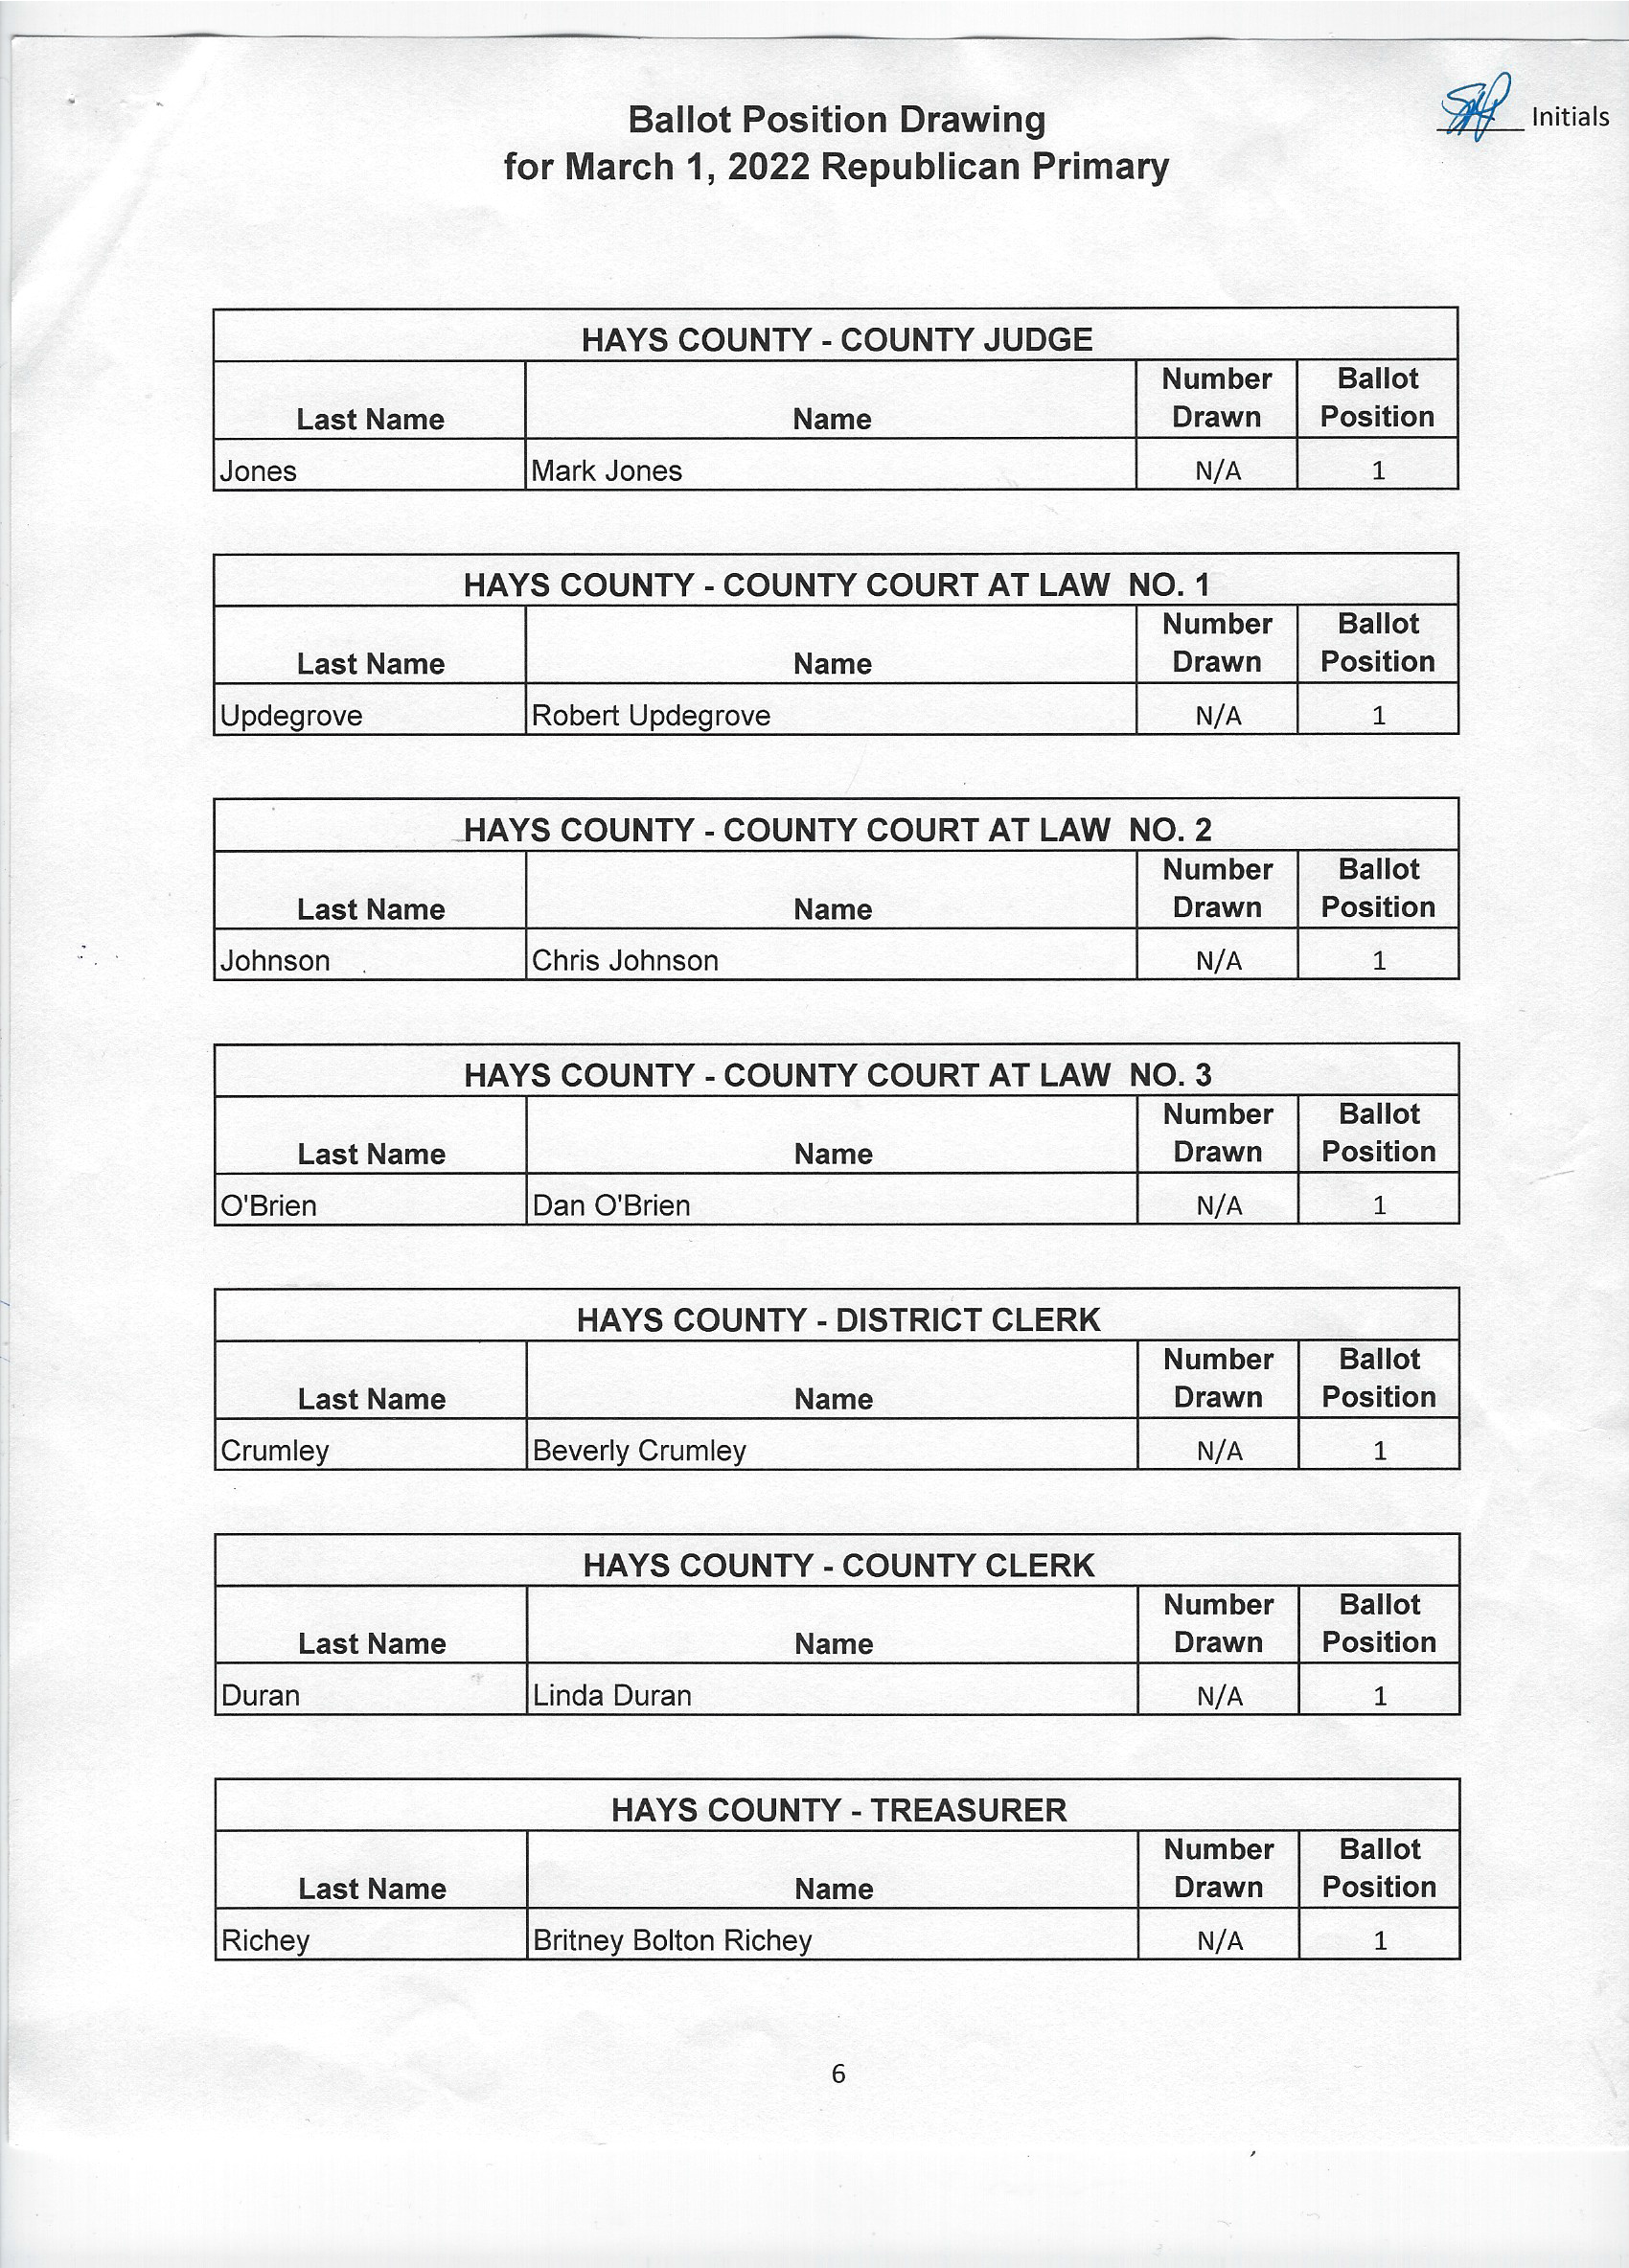 2022 Primary GOP Ballot Draw Results (Pg.6)